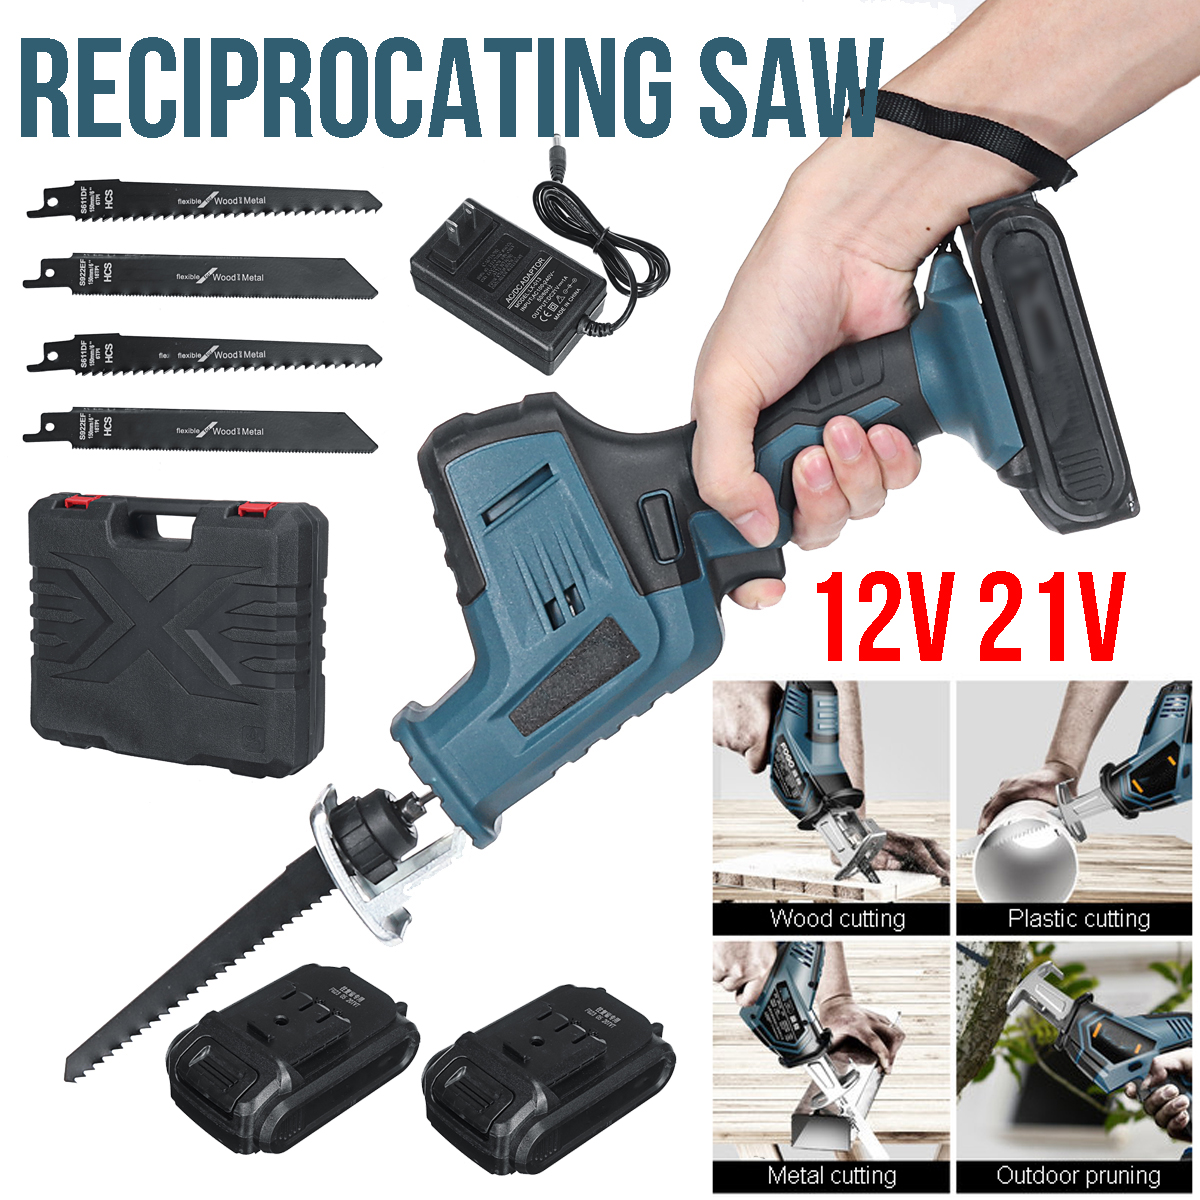 Cordless-Portable-Electric-Reciprocating-Saw-Cutter-Metal-Cutting-Saw-W-1-or-2-Battery-1721112-2